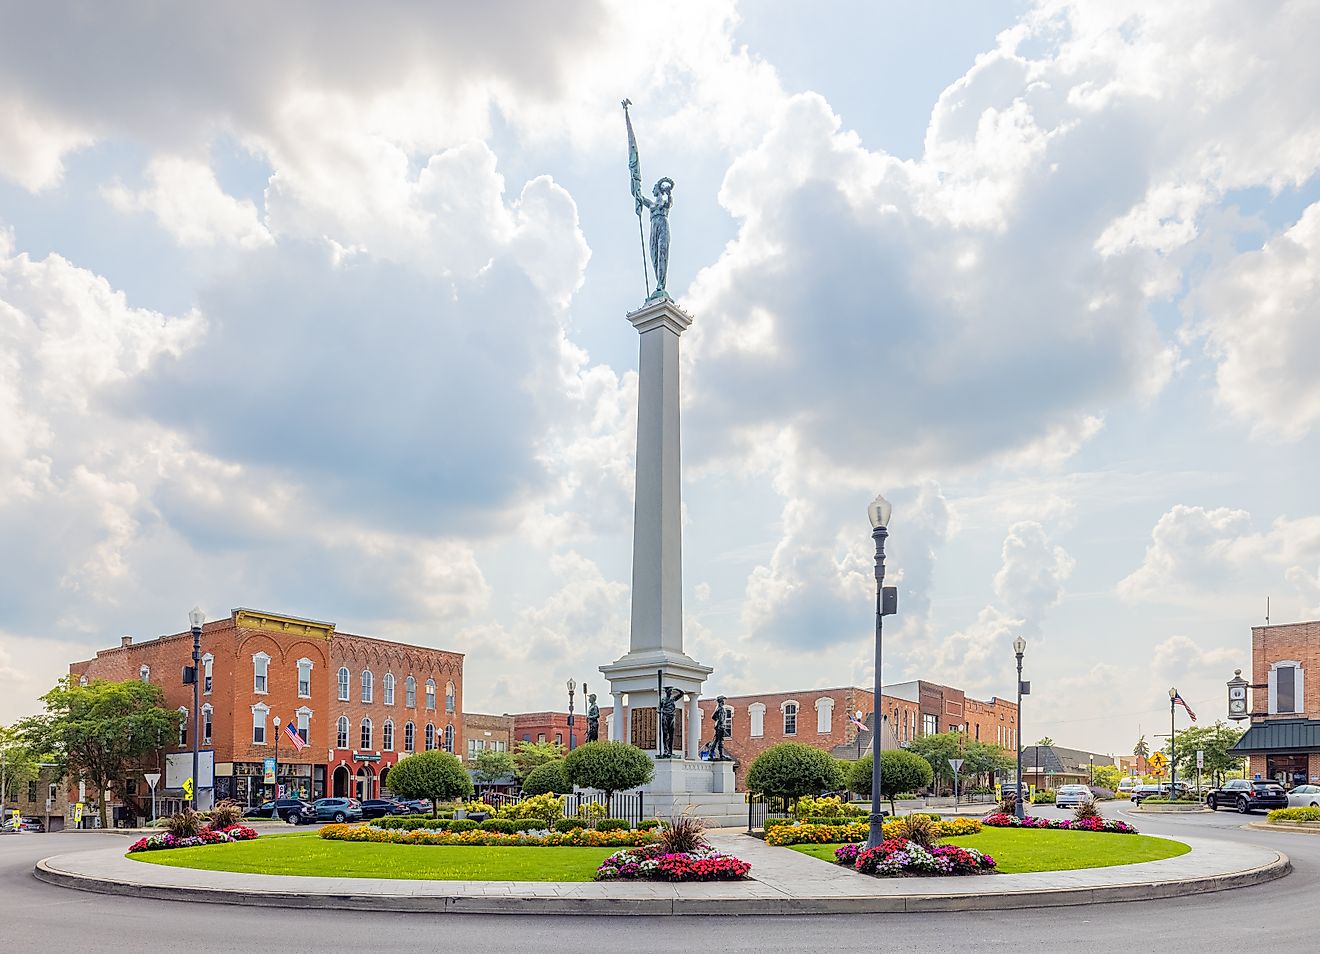 The Steuben County Soldiers Monument in downtown Angola, Indiana. Editorial credit: Roberto Galan / Shutterstock.com